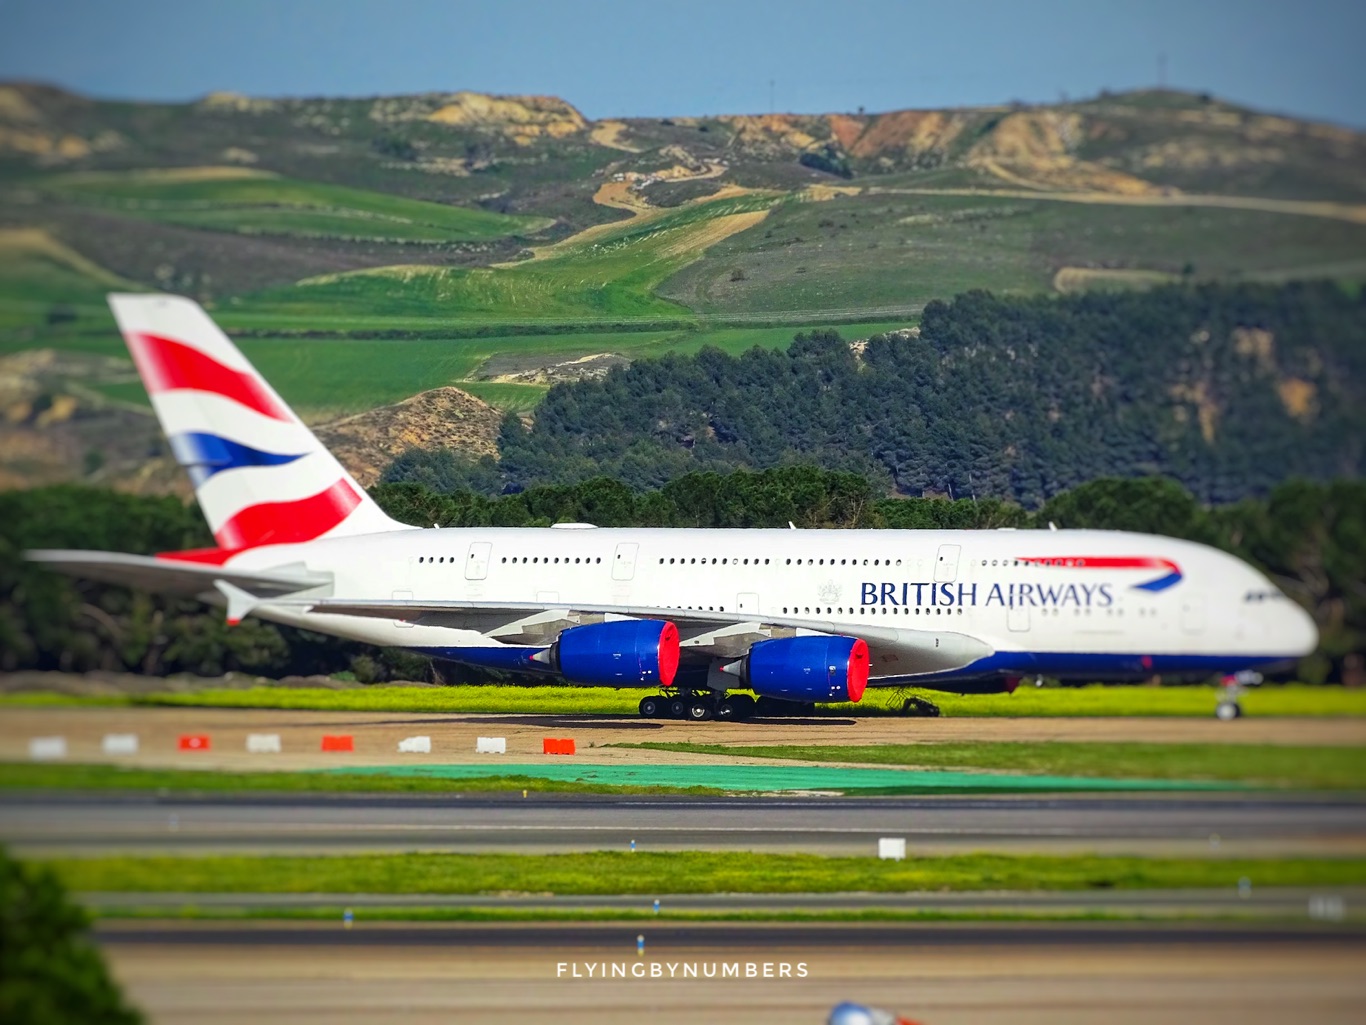 British Airways A380 grounded during covid in Madrid